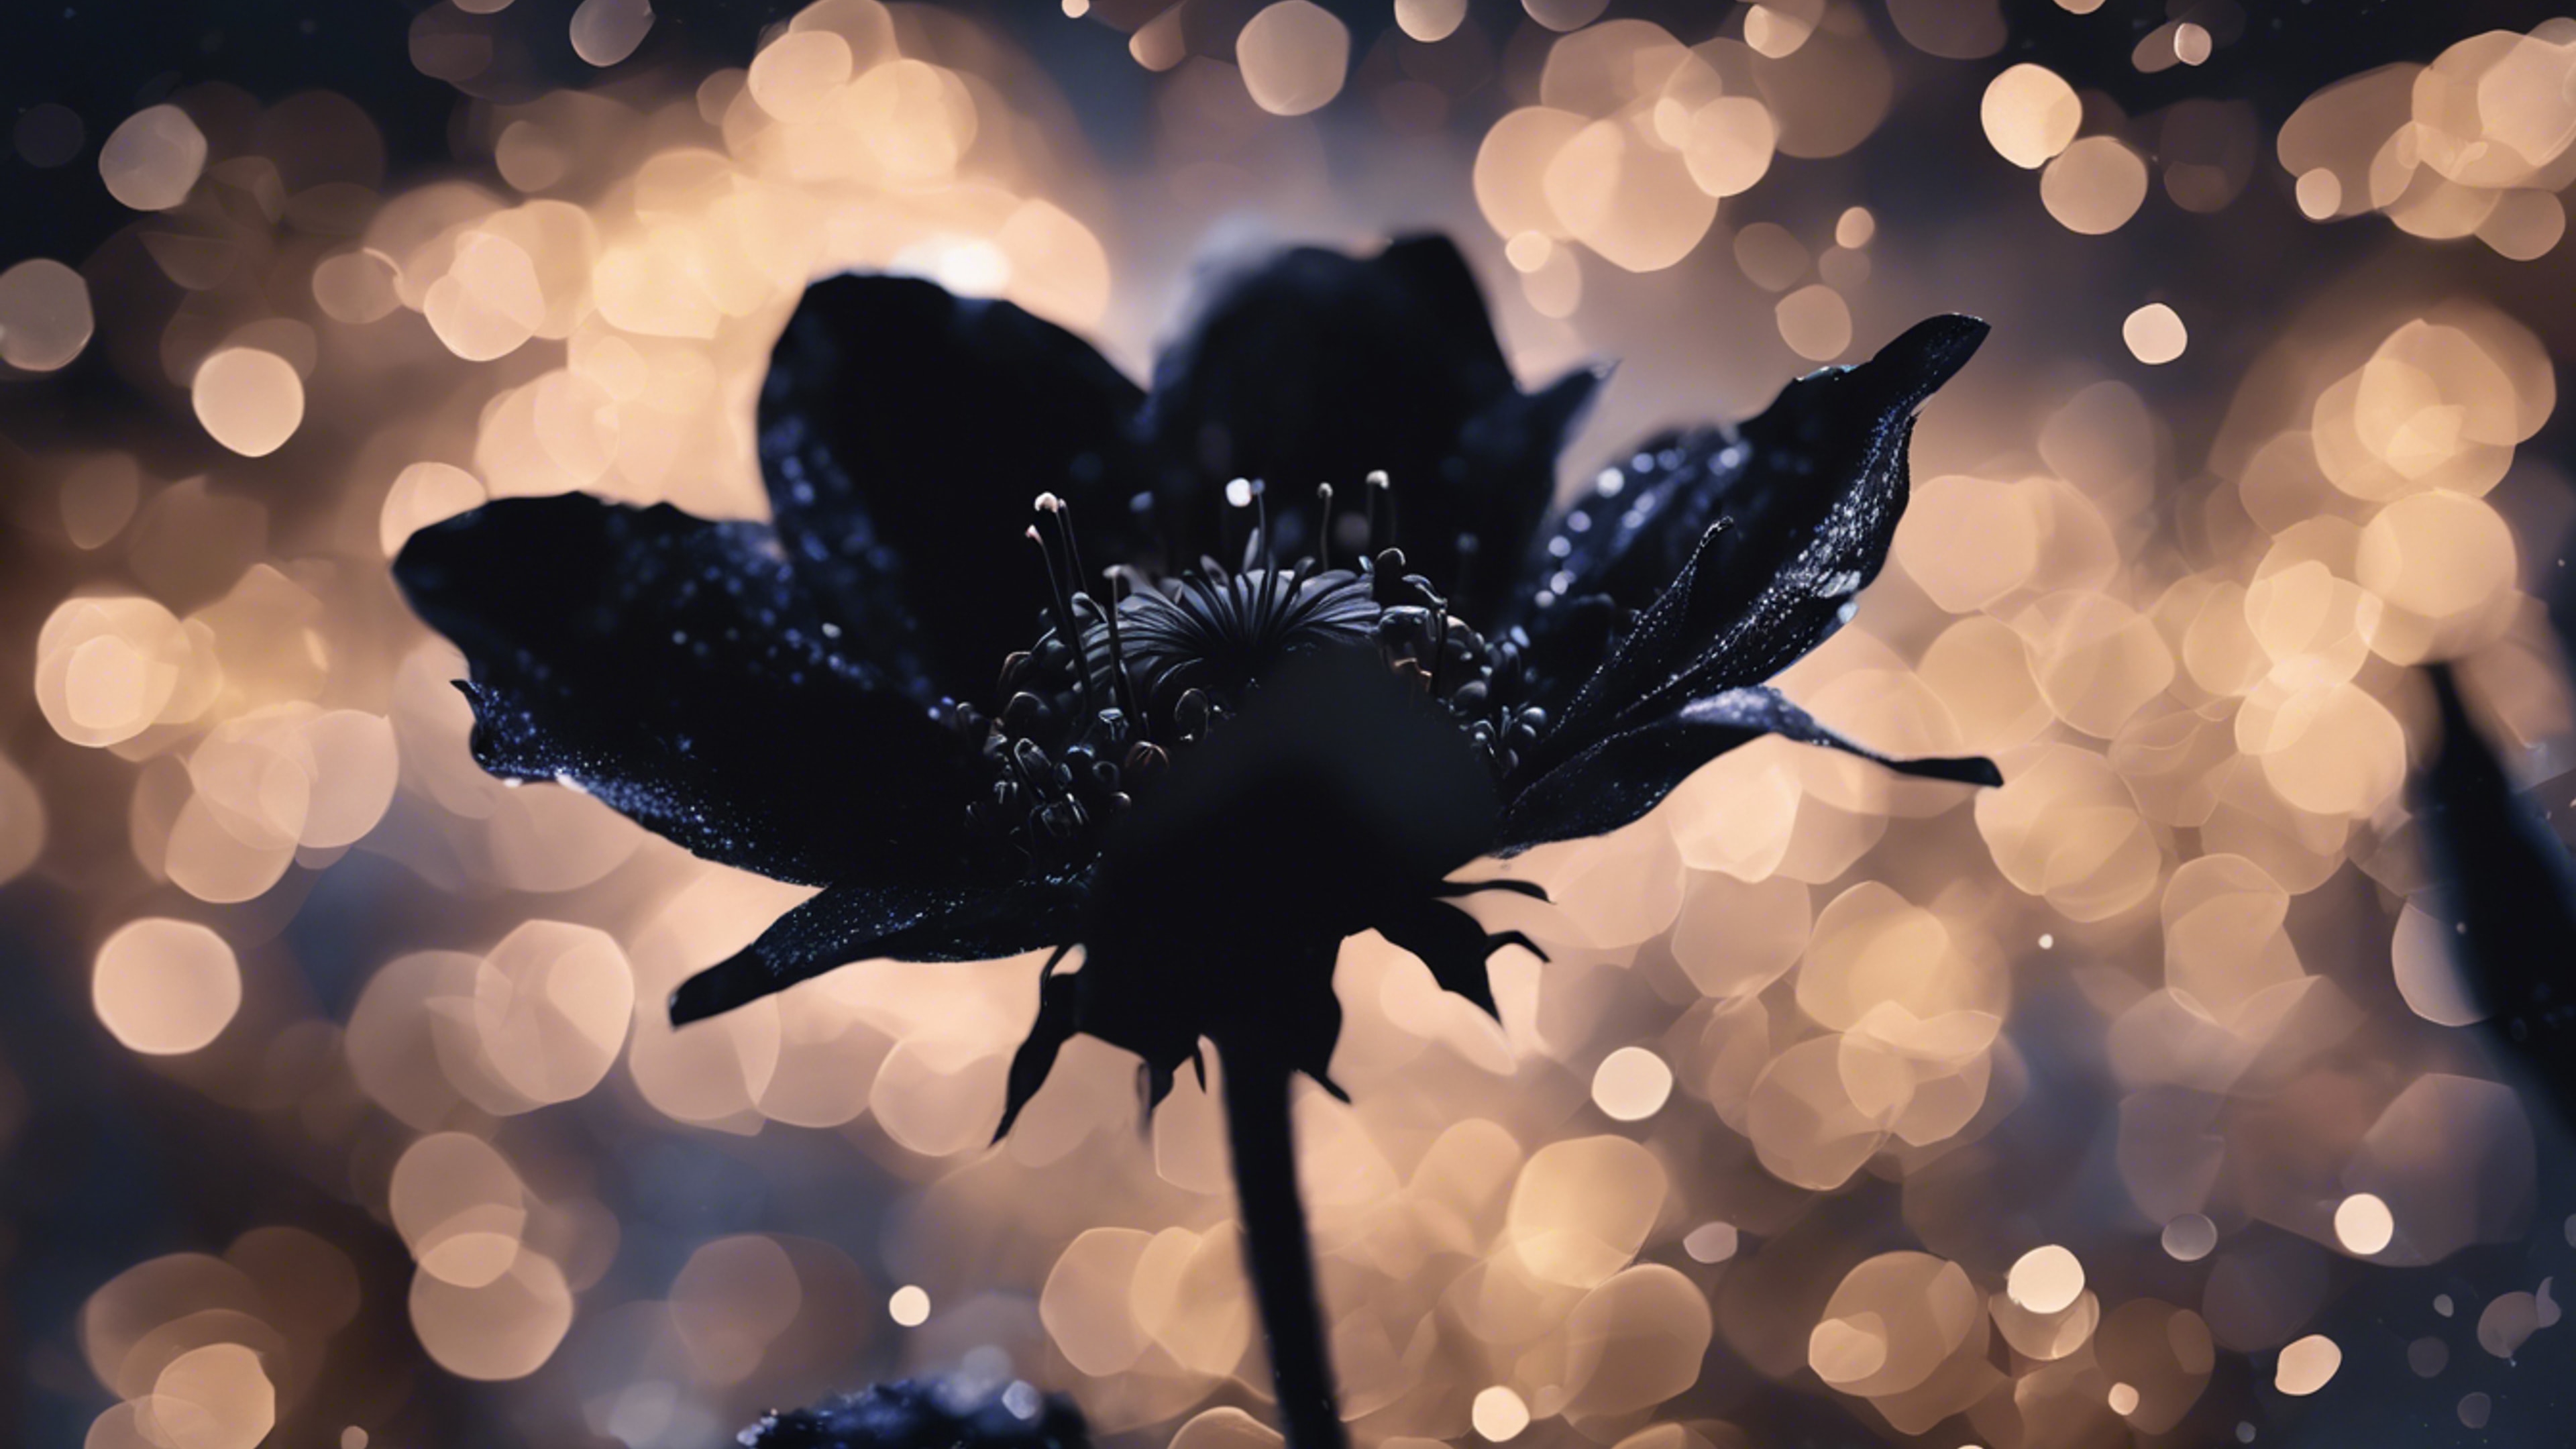 A silhouette of a night-blooming black flower, its petals slightly shimmering beneath a starlit sky. 牆紙[42f6de17cdb14a3f8111]